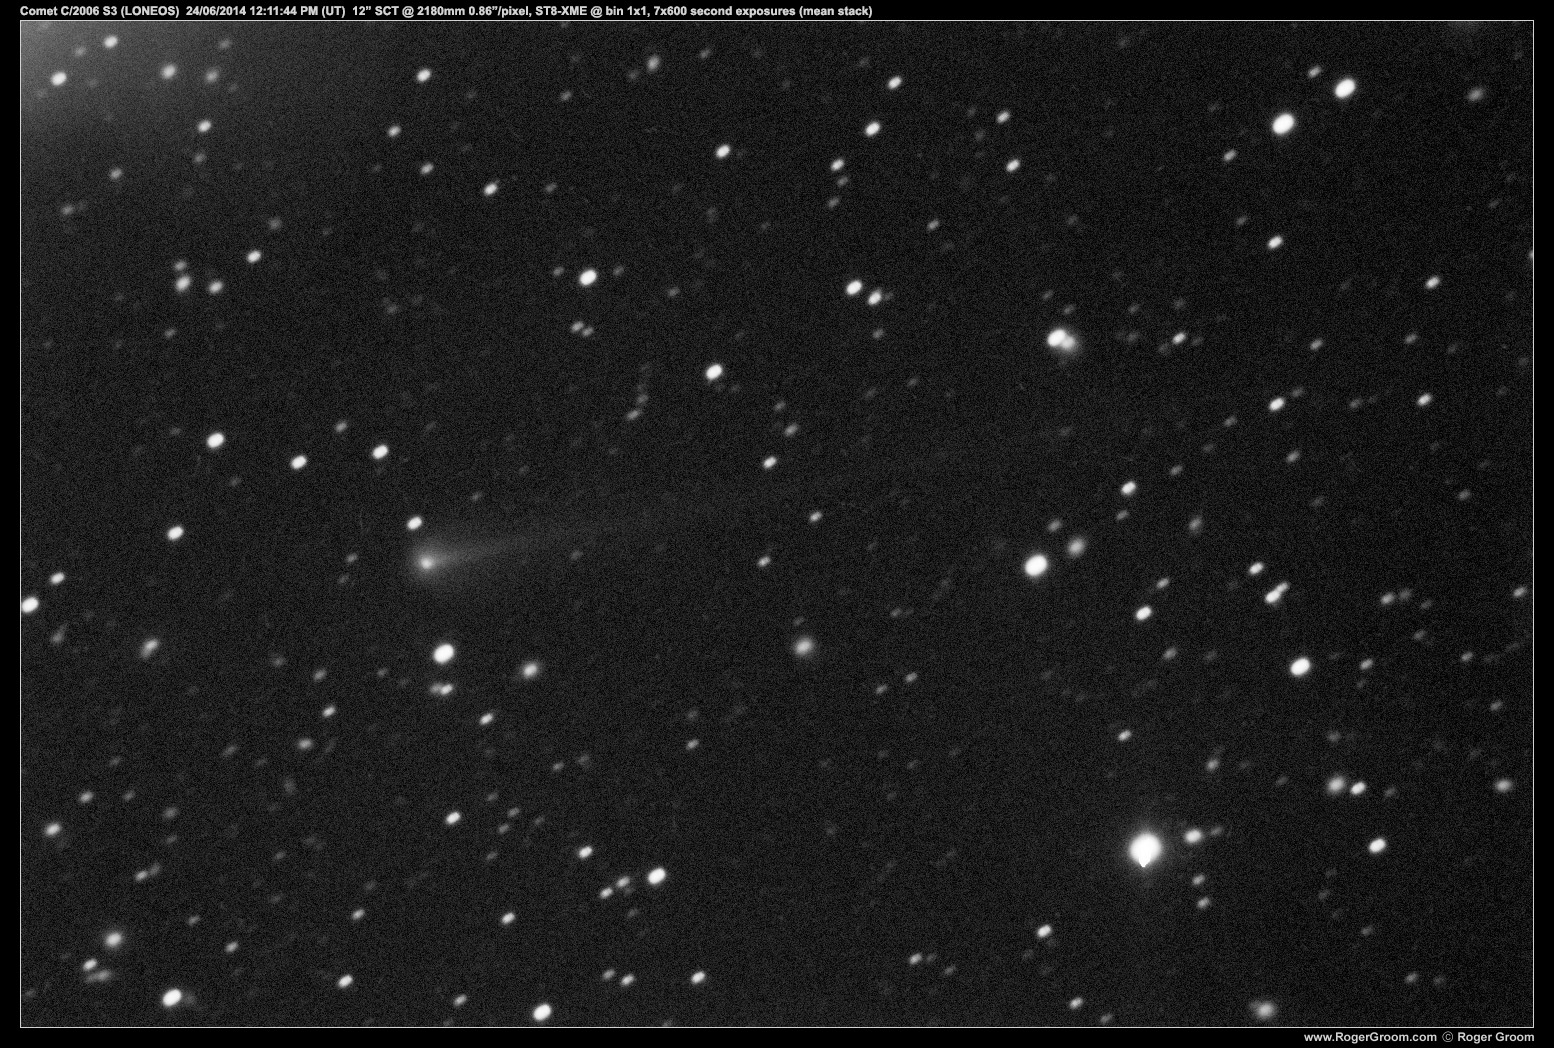 Comet C/2006 S3 (LONEOS). Taken using ST8-XME bin 1x1 on 12" SCT @ 2180mm focal length resulting in 0.86"/pixel scale. 7 x 600 second exposures, combined using mean (average) stack.